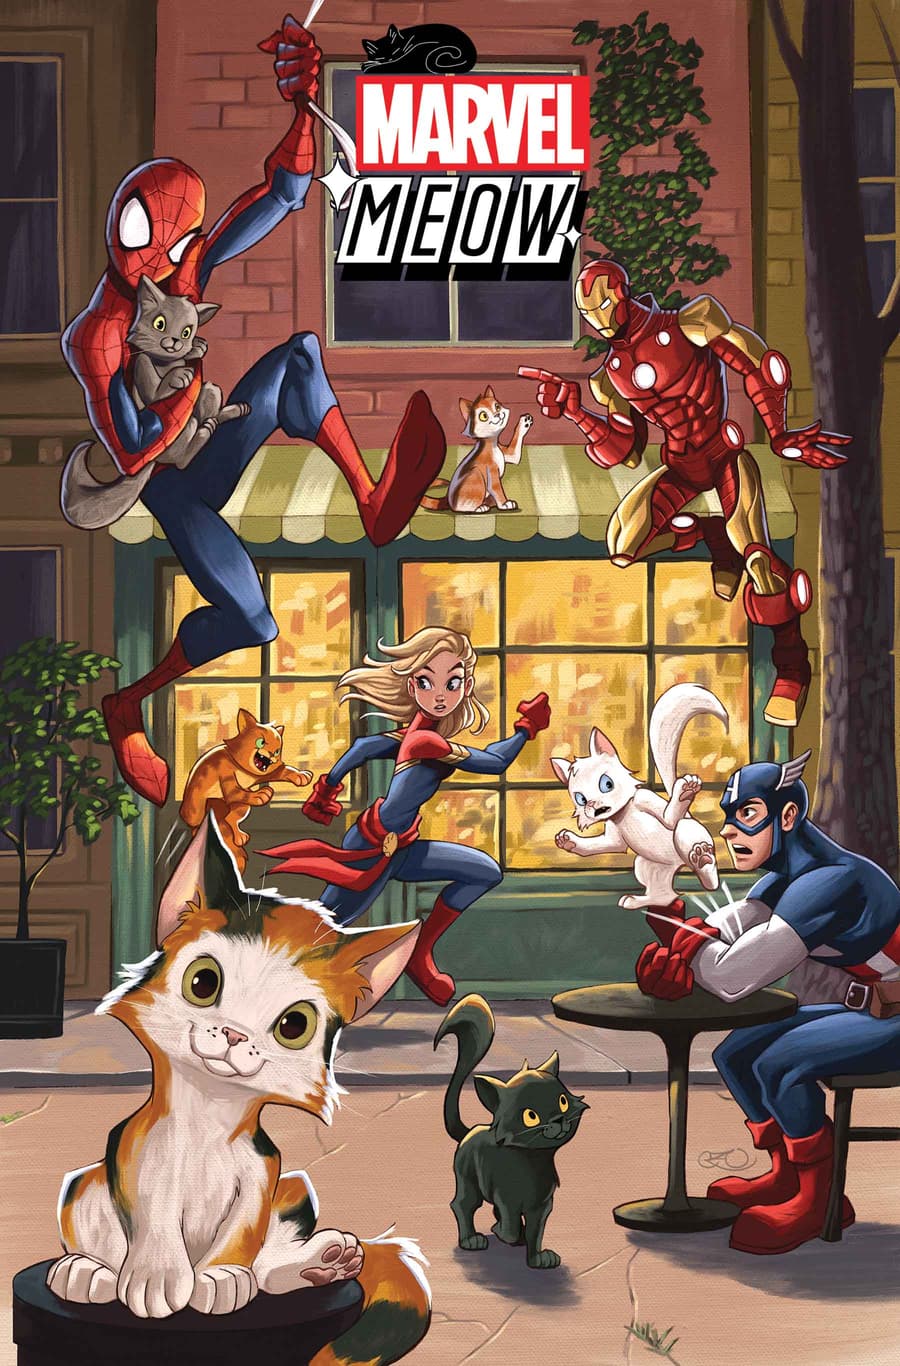 Marvel Meow #1 Cover by Chrissie Zullo